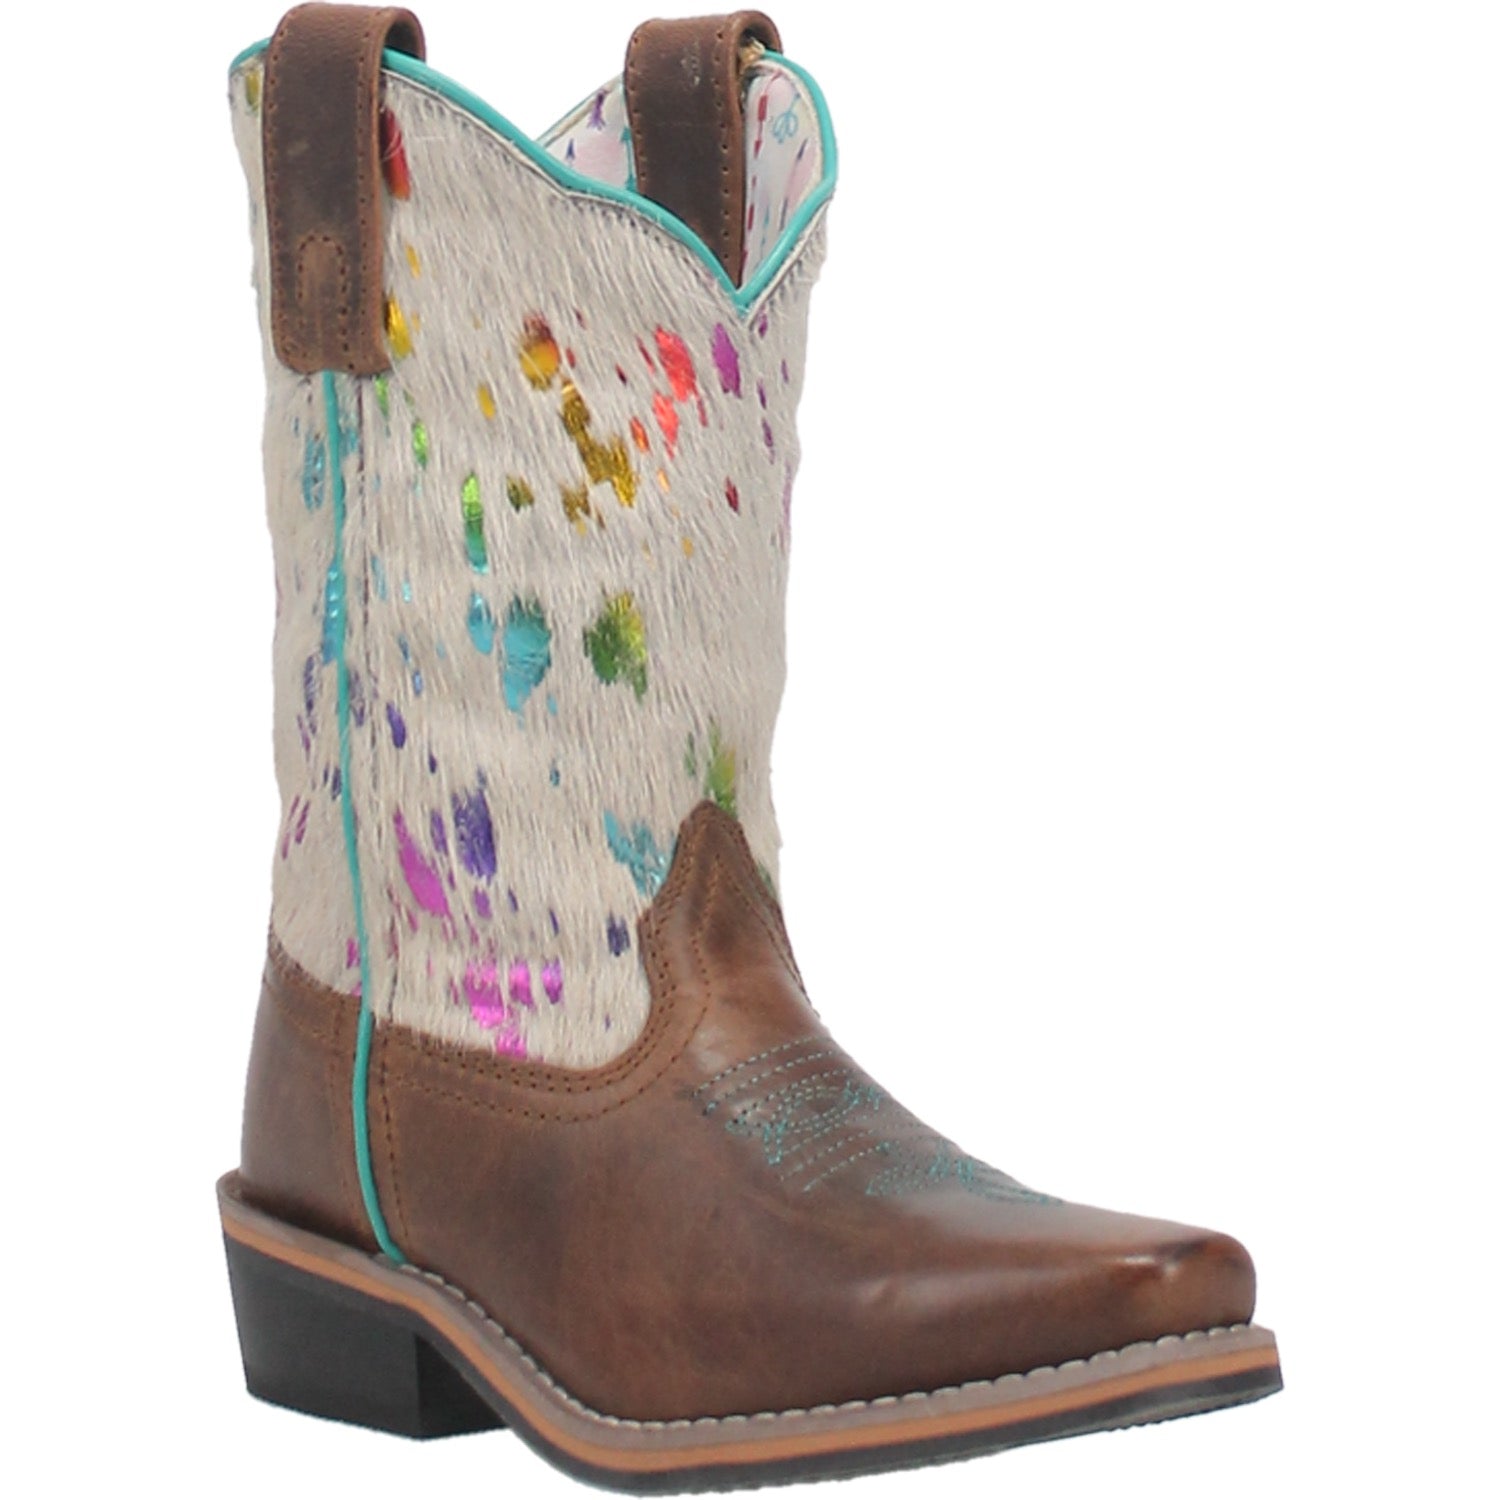 RUMI LEATHER YOUTH BOOT Cover